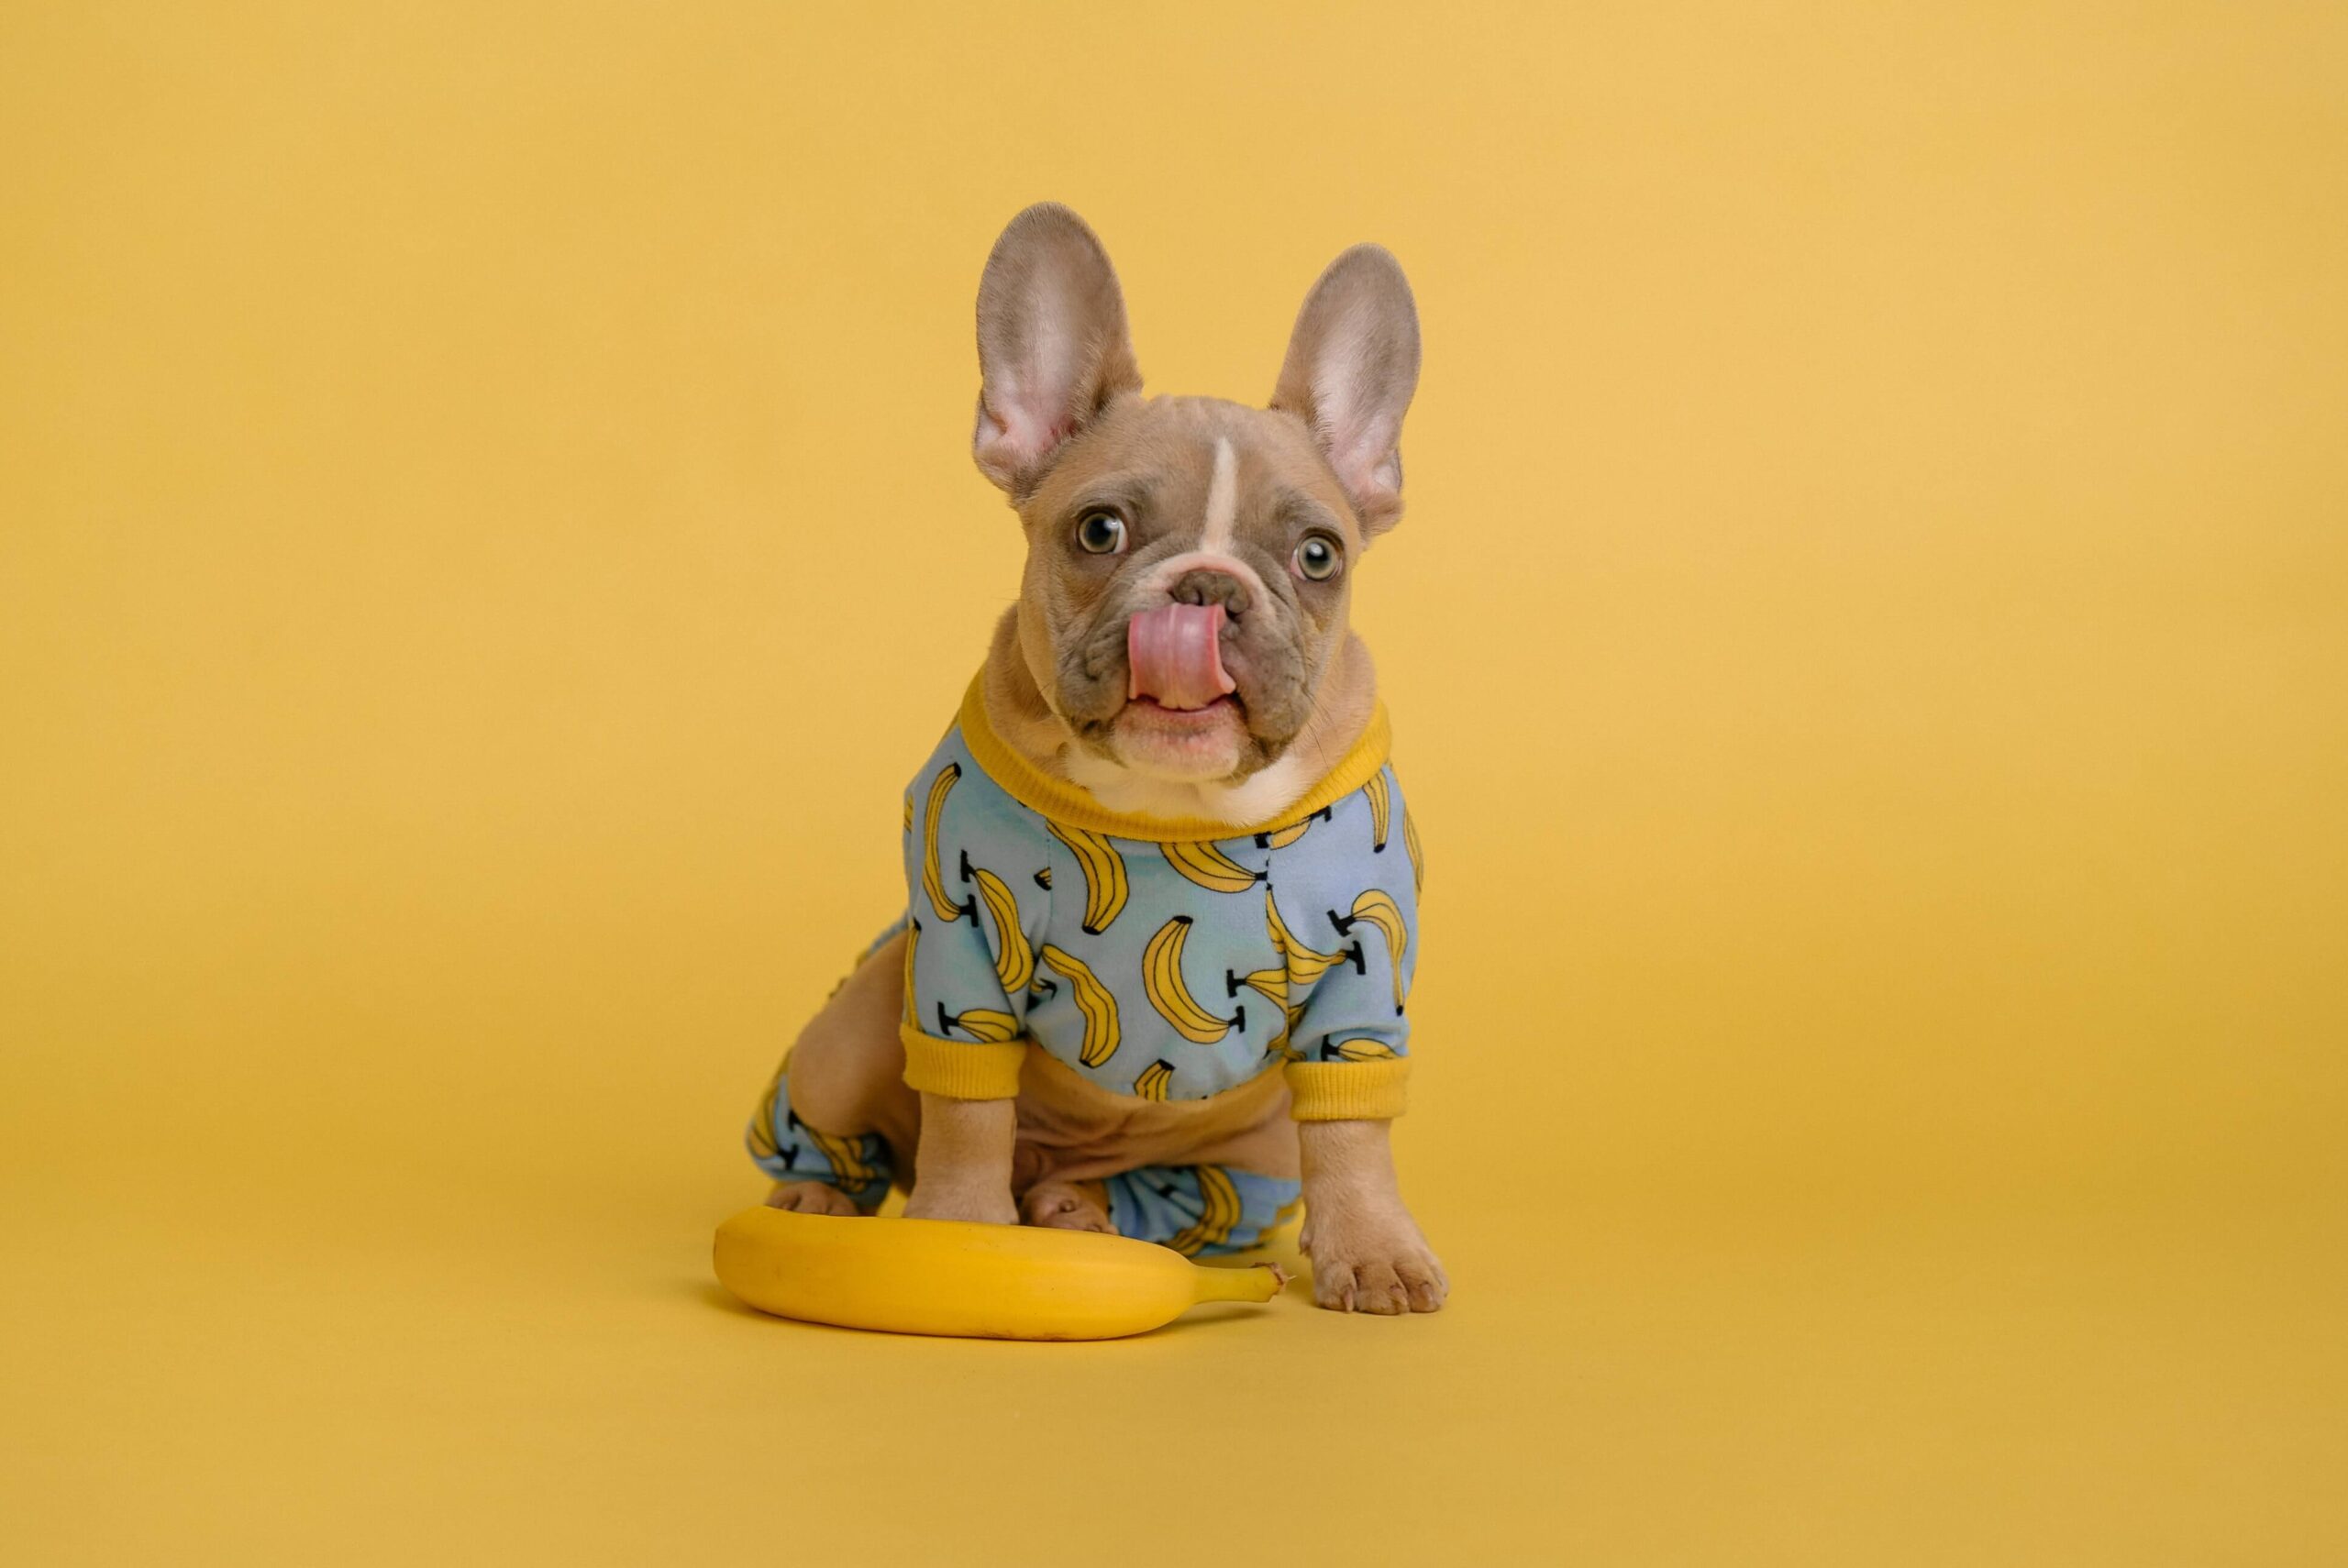 Benefits of Bananas for Dogs - A dog sitting in front of banana while licking his tongue